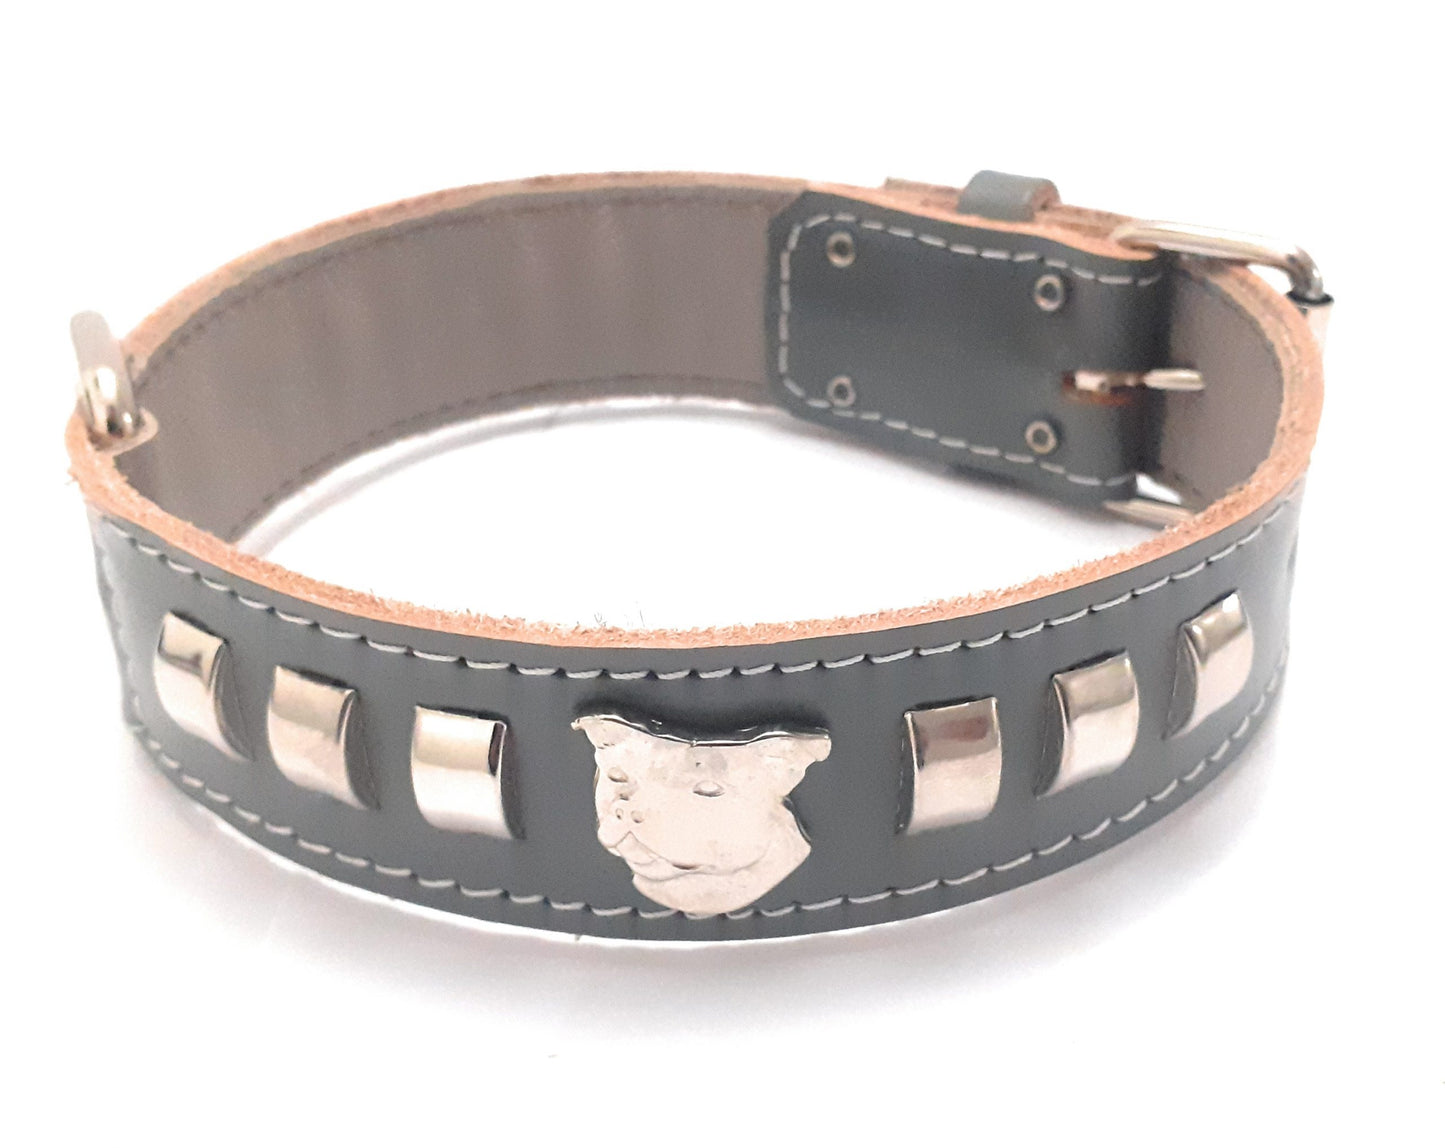 1.5" Grey Leather Dog Collar with Decorative Design and Staffy Badge